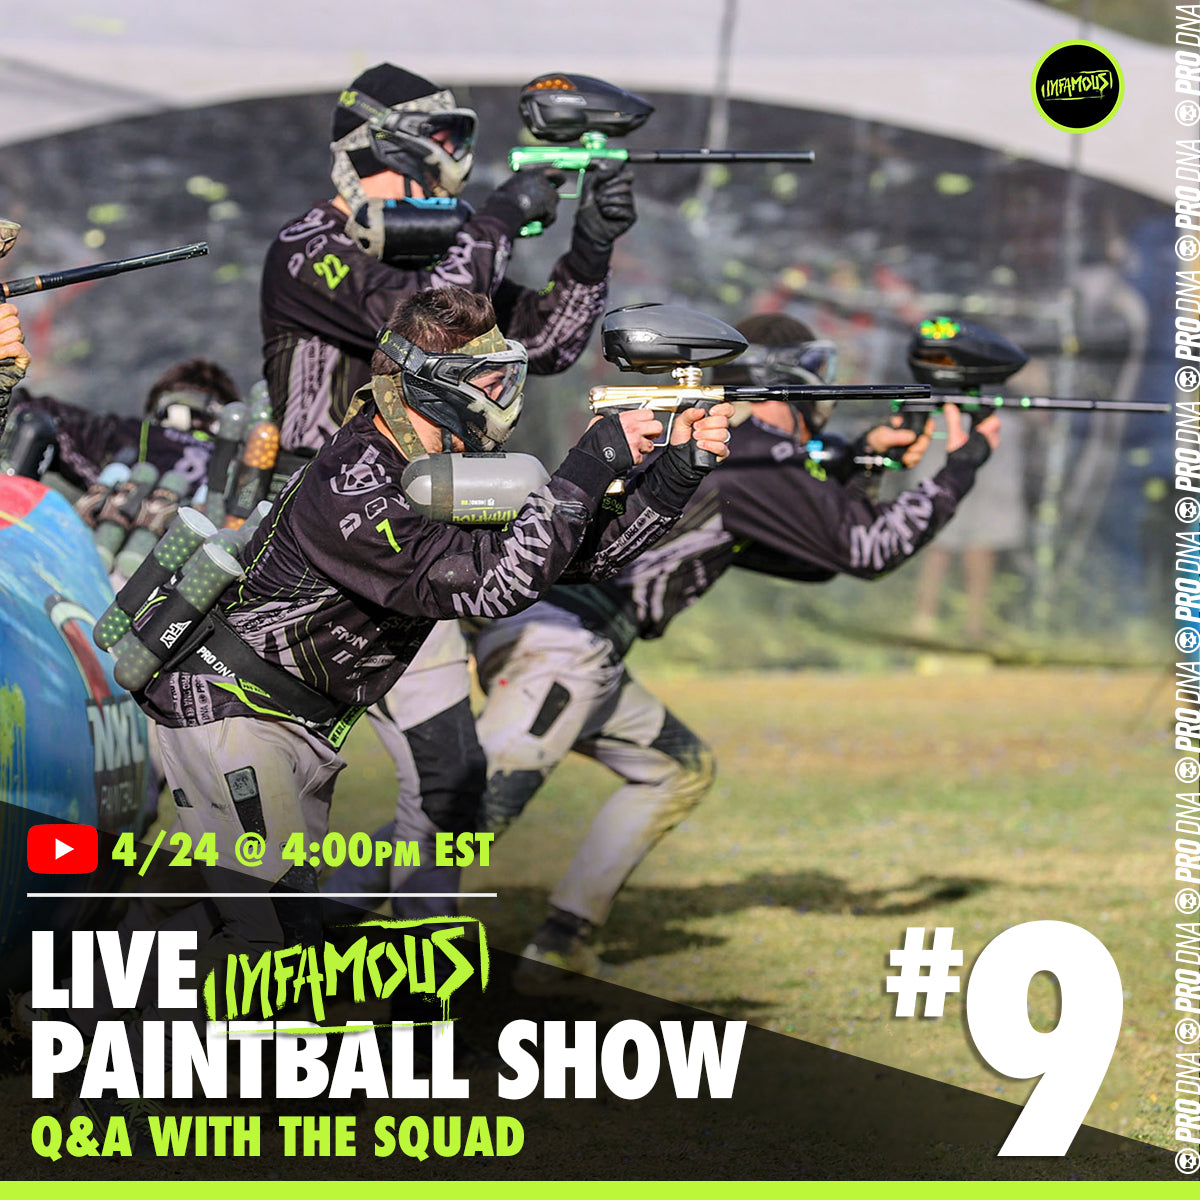 Infamous Live Paintball Show #9 - w/ The Team